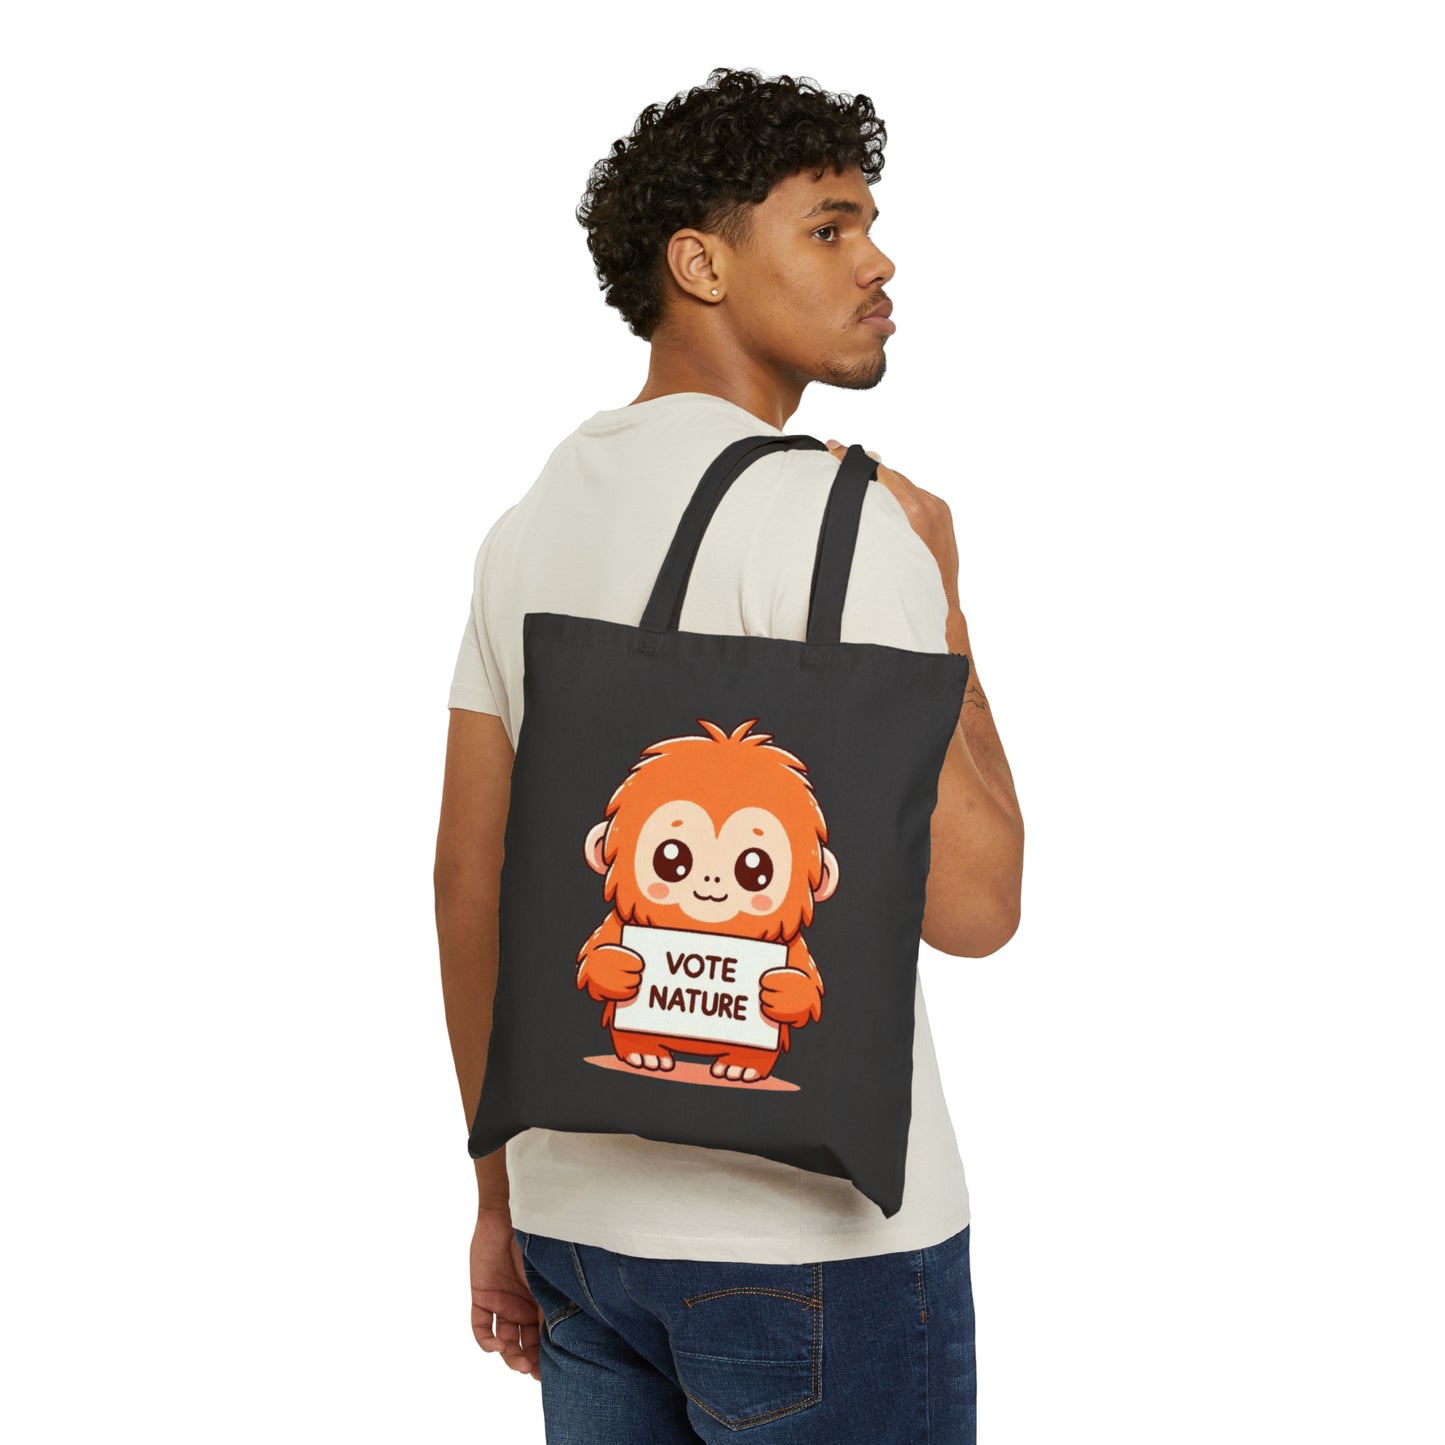 Inspirational Cute Orangutan Statement Canvas Tote Bag: Vote Nature! carry laptop, kindle, phone, notebook, goodies to work/coffee shop